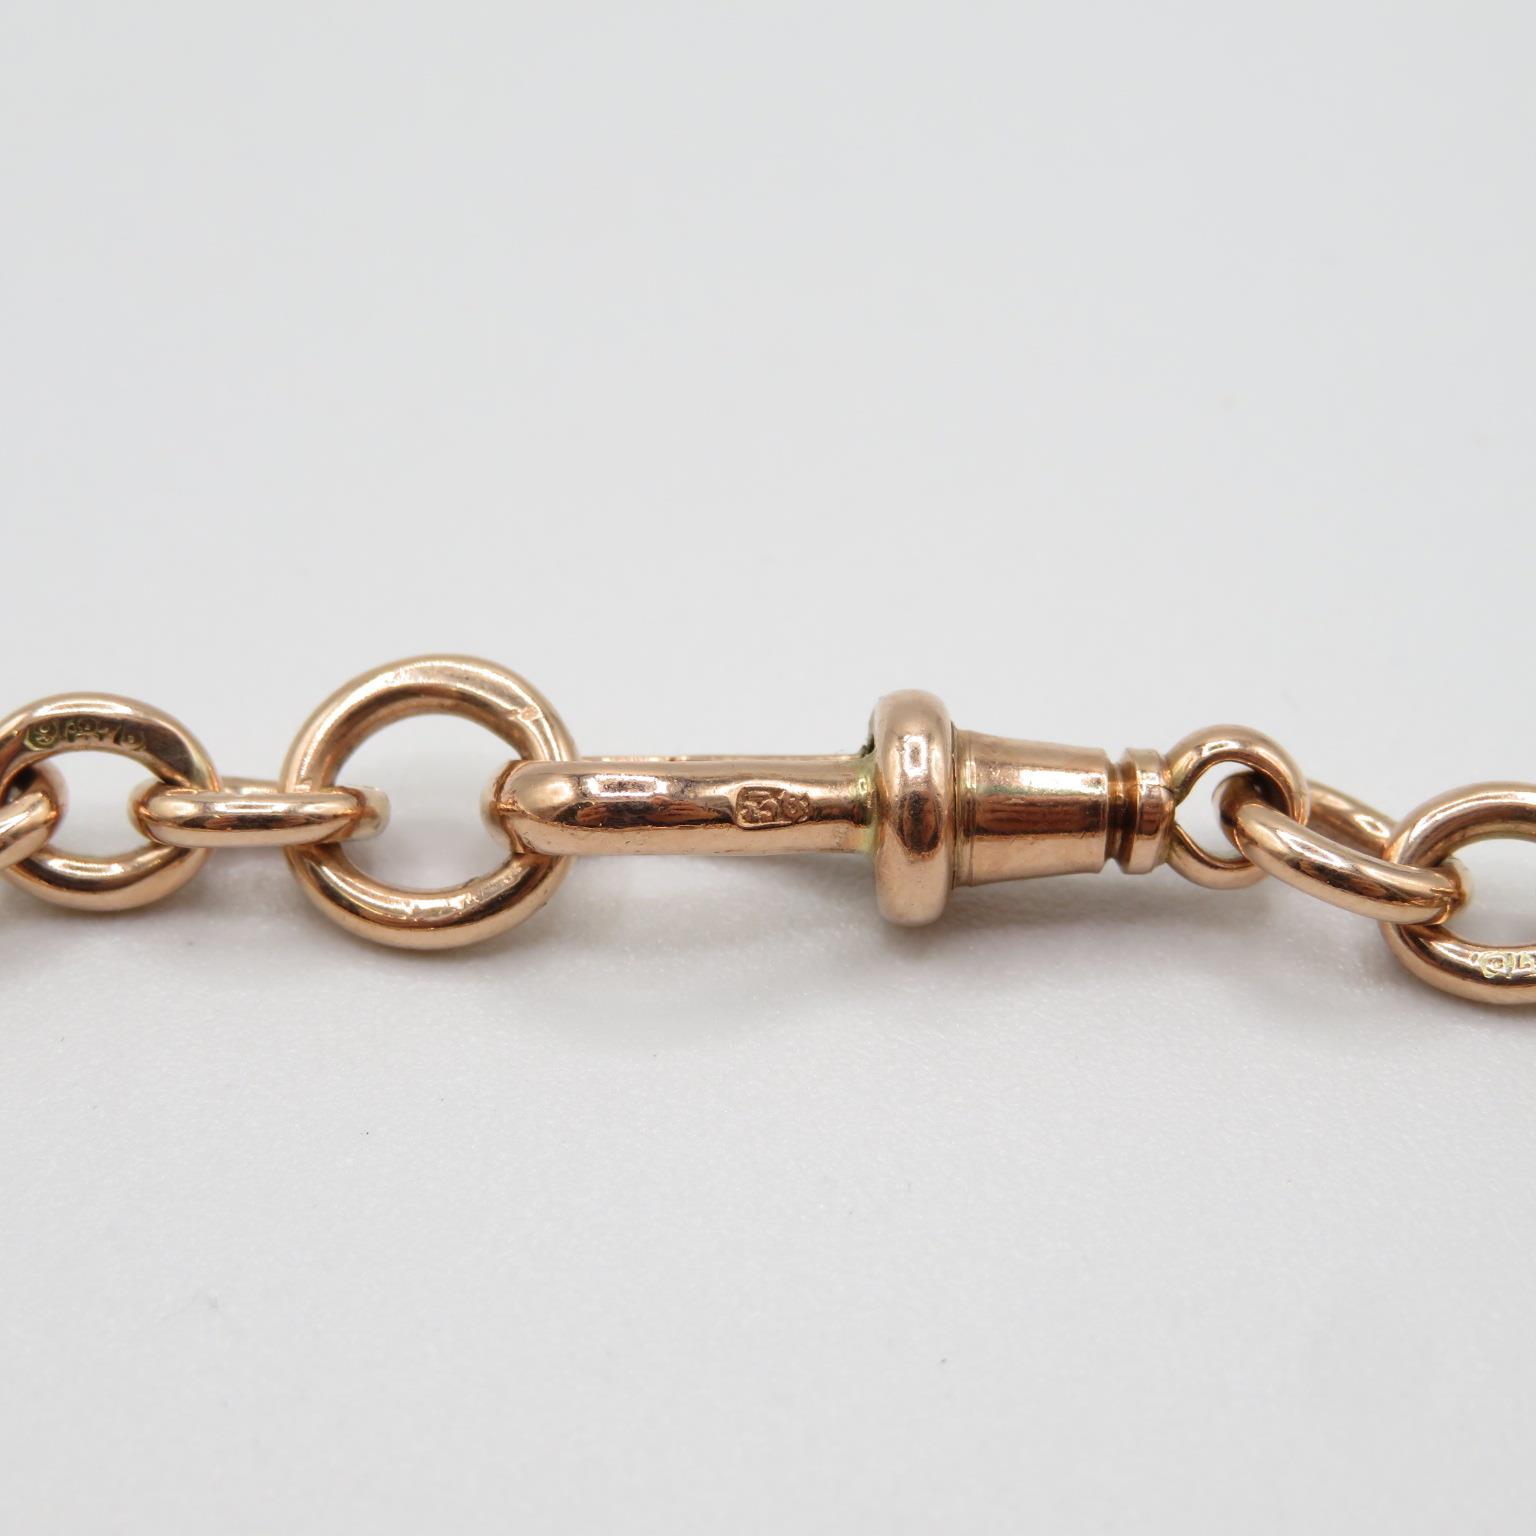 Old watch chain converted into bracelet with dog clip 7" long 15.7g - Image 5 of 7